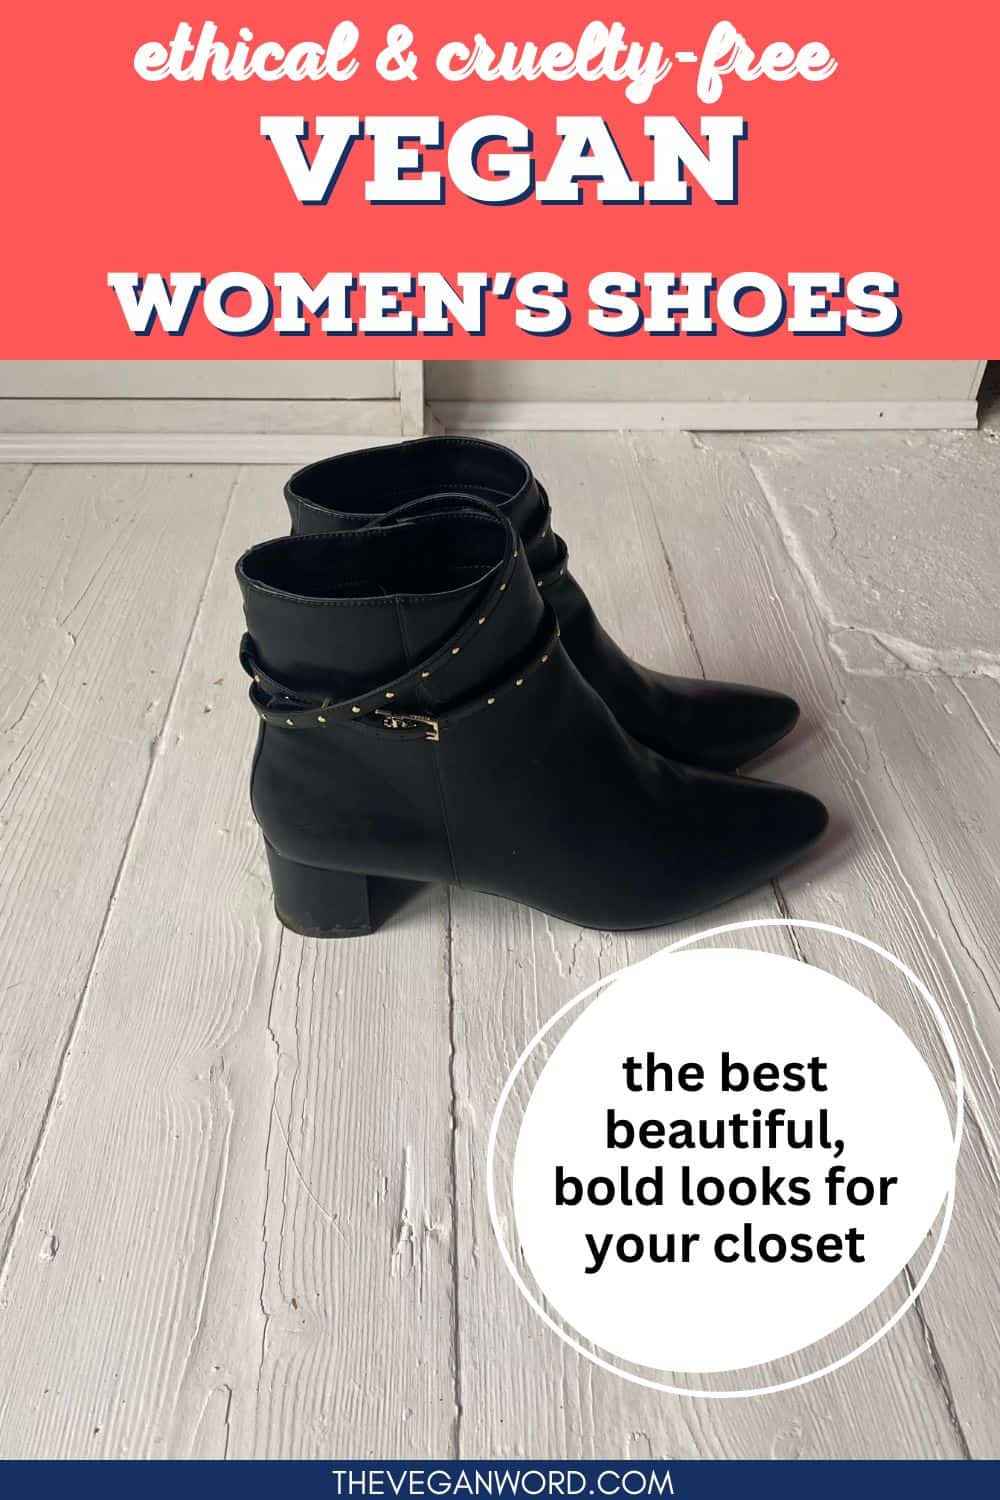 Pinterest image showing black vegan leather boots with studded straps and text that reads "ethical & cruelty free vegan women's shoes: the best beautiful, bold looks for your closet"